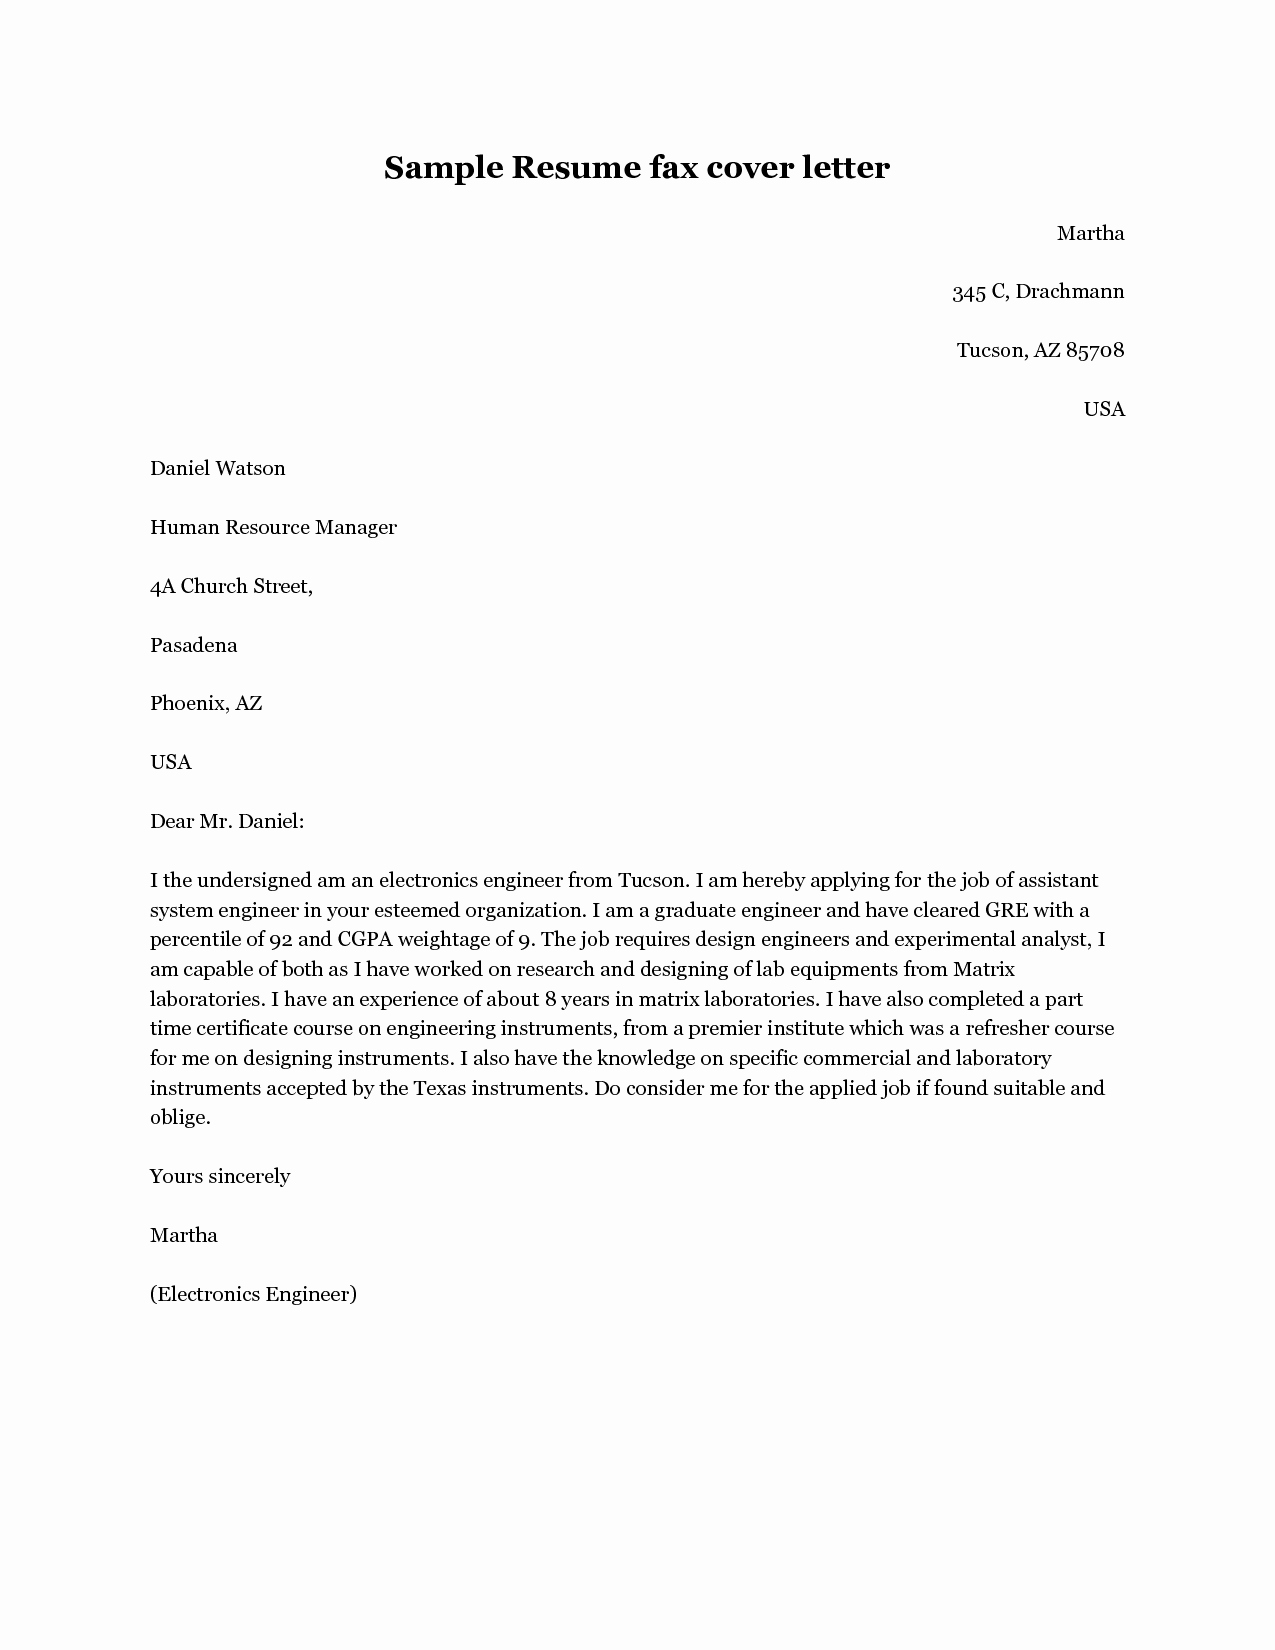 Cover Letter for A Fax Luxury 8 Best Of Fax Cover Sheet Resume Sample Resume